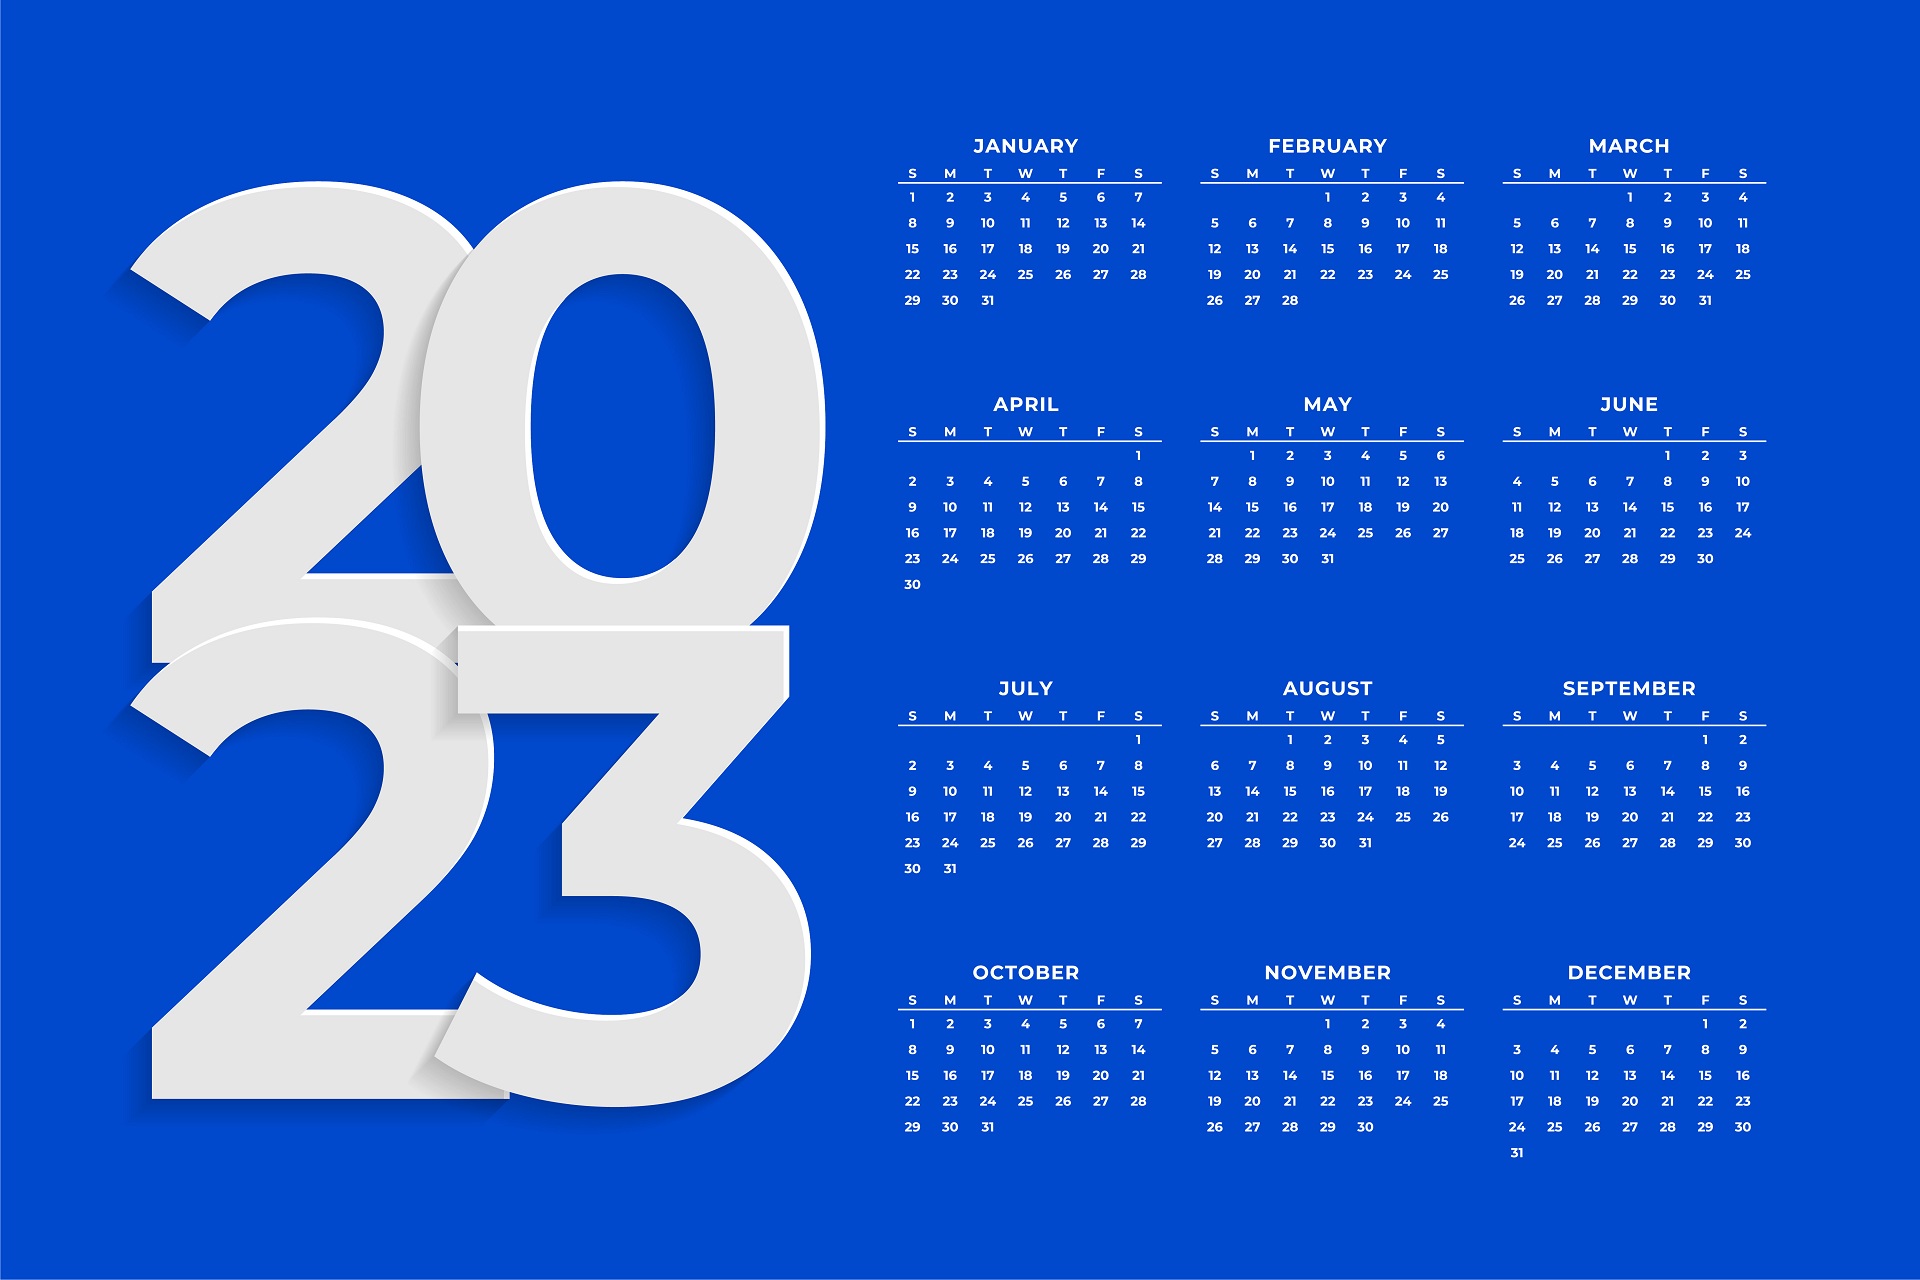 Calendar 2023, Annual Calendar, Monthly Calendar, Weekly Calendar, Yearly Calendar, Days, HD Wallpapers, 2K, 4K, 5K, 8K, Desktop Wallpapers, Laptop Wallpapers, Screen Wallpapers, Phone Wallpapers, Android